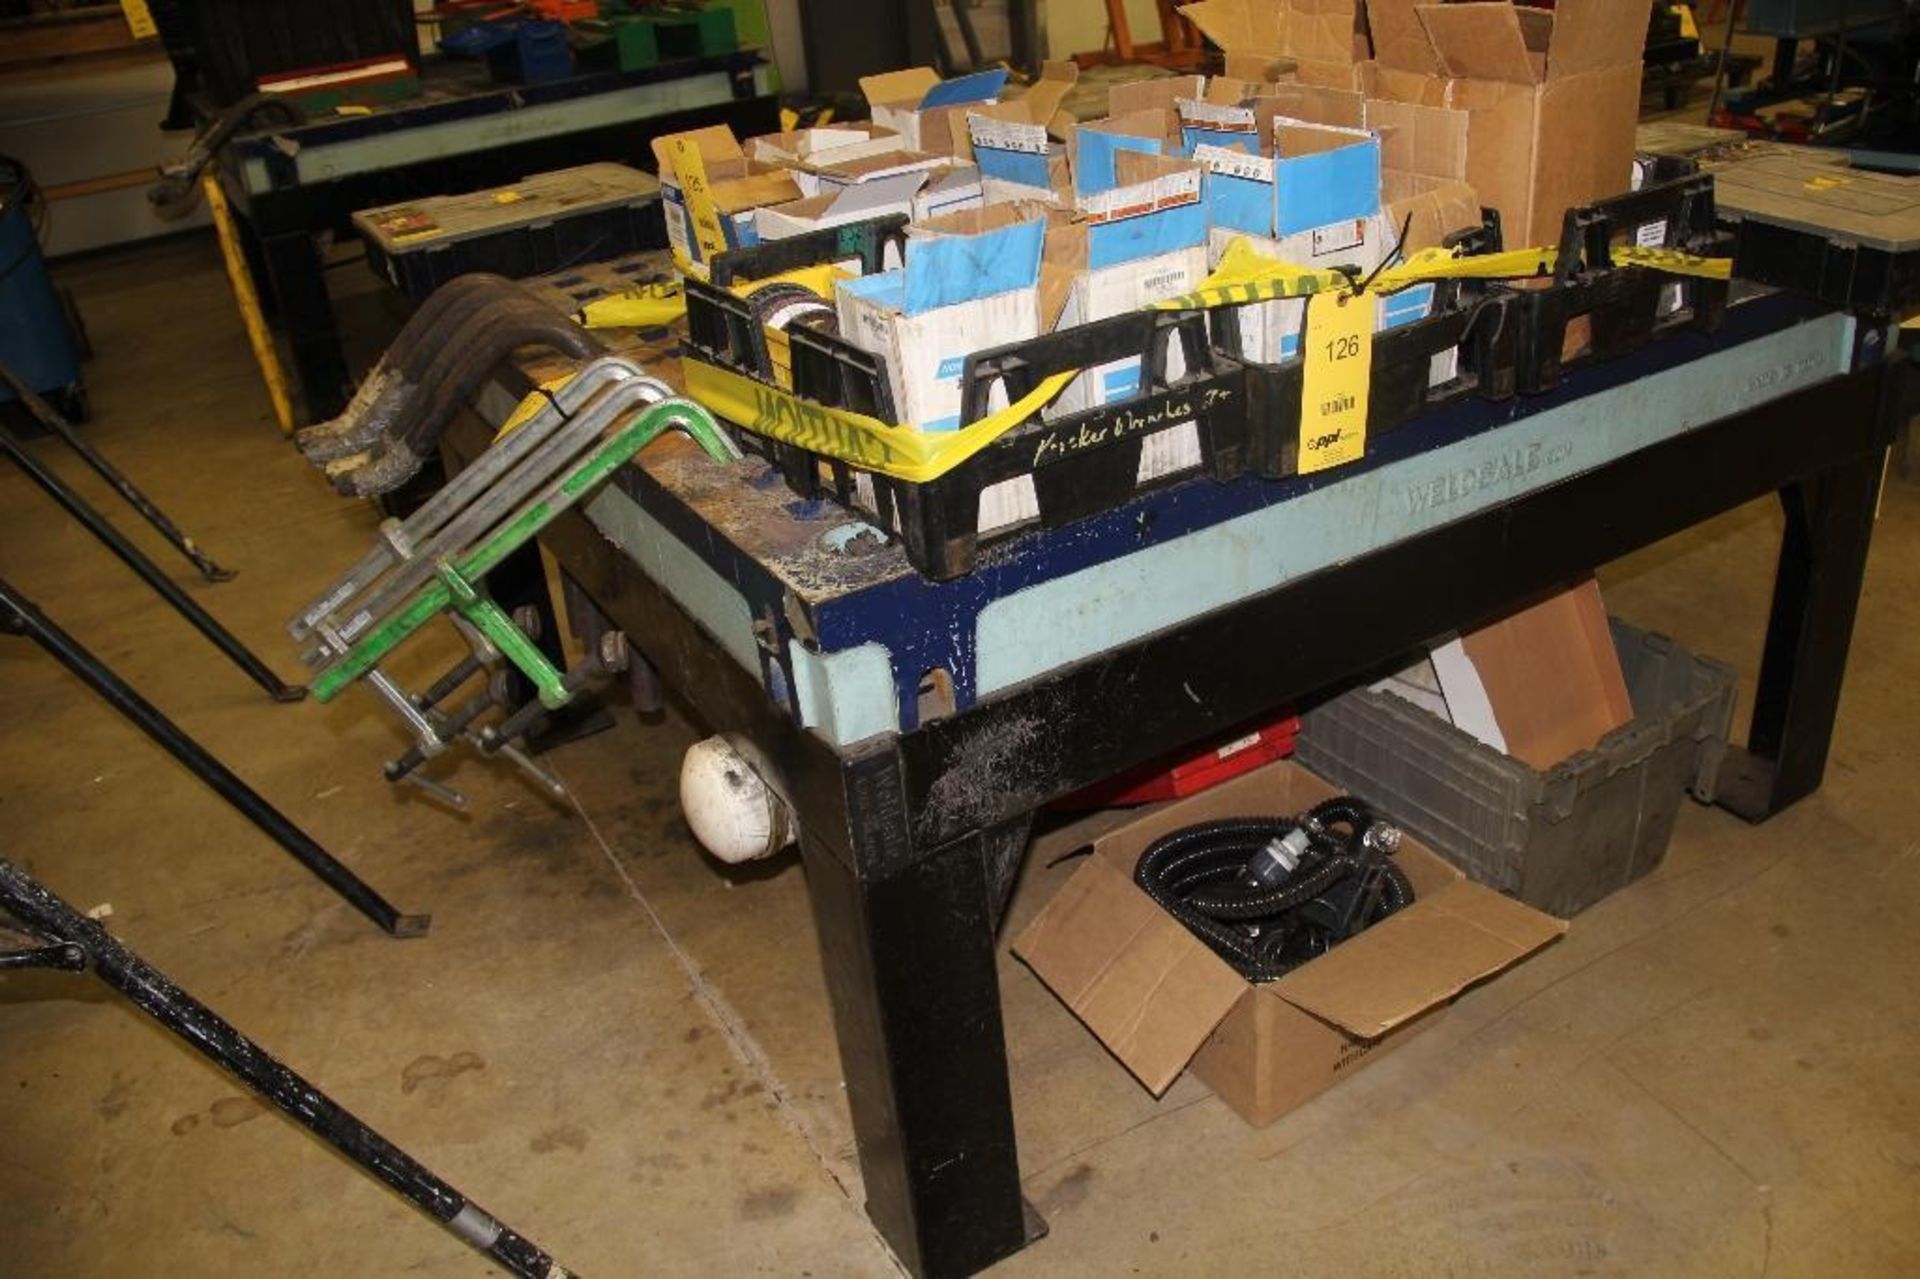 Weldsale 5 ft. x 5 ft. x 32 in. High Welding Table (SALE SUBJECT TO SECURED LENDER'S APPROVAL) - Image 3 of 3